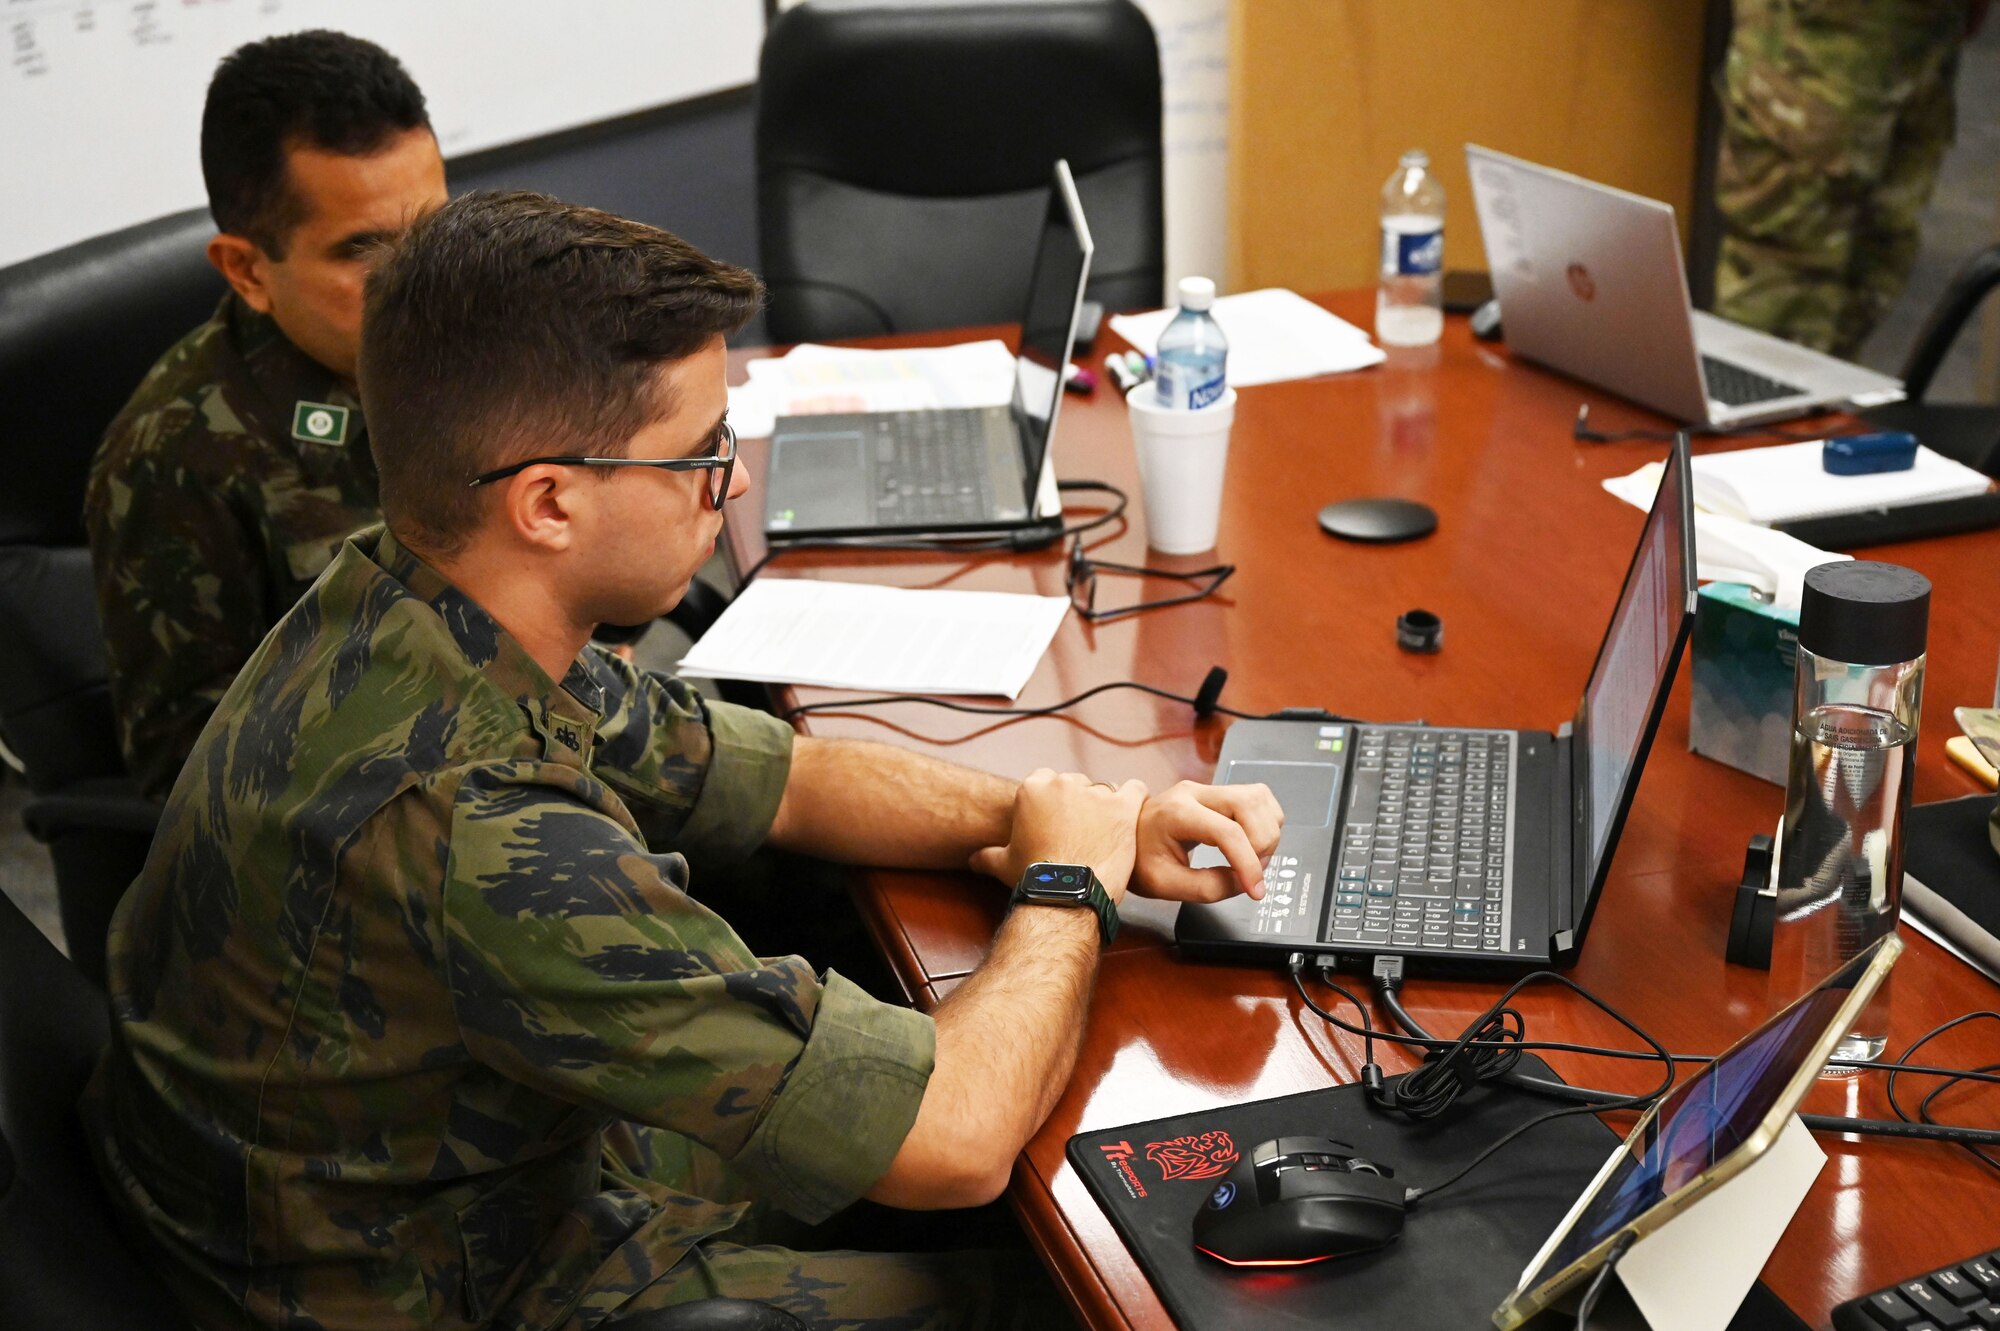 Two of the brazilian military members involved in BOLT 5 of Vulcan guard look through data on laptop.